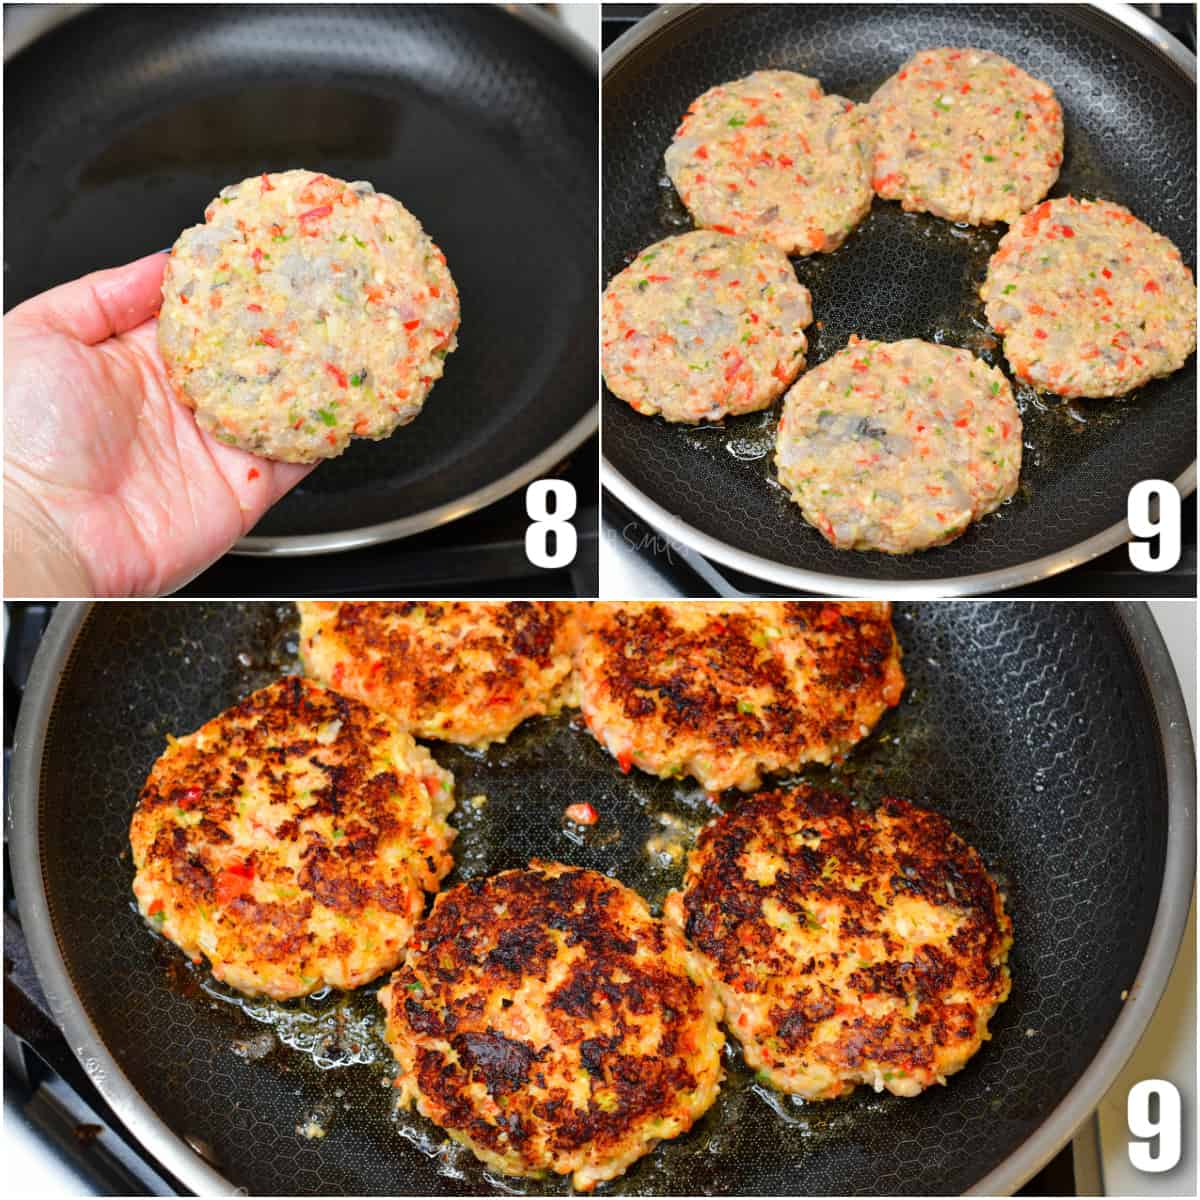 One image shows a hand holding a patty over a skillet. The second image shows patties cooking in a skillet. The third image shows cooked patties in a skillet. 